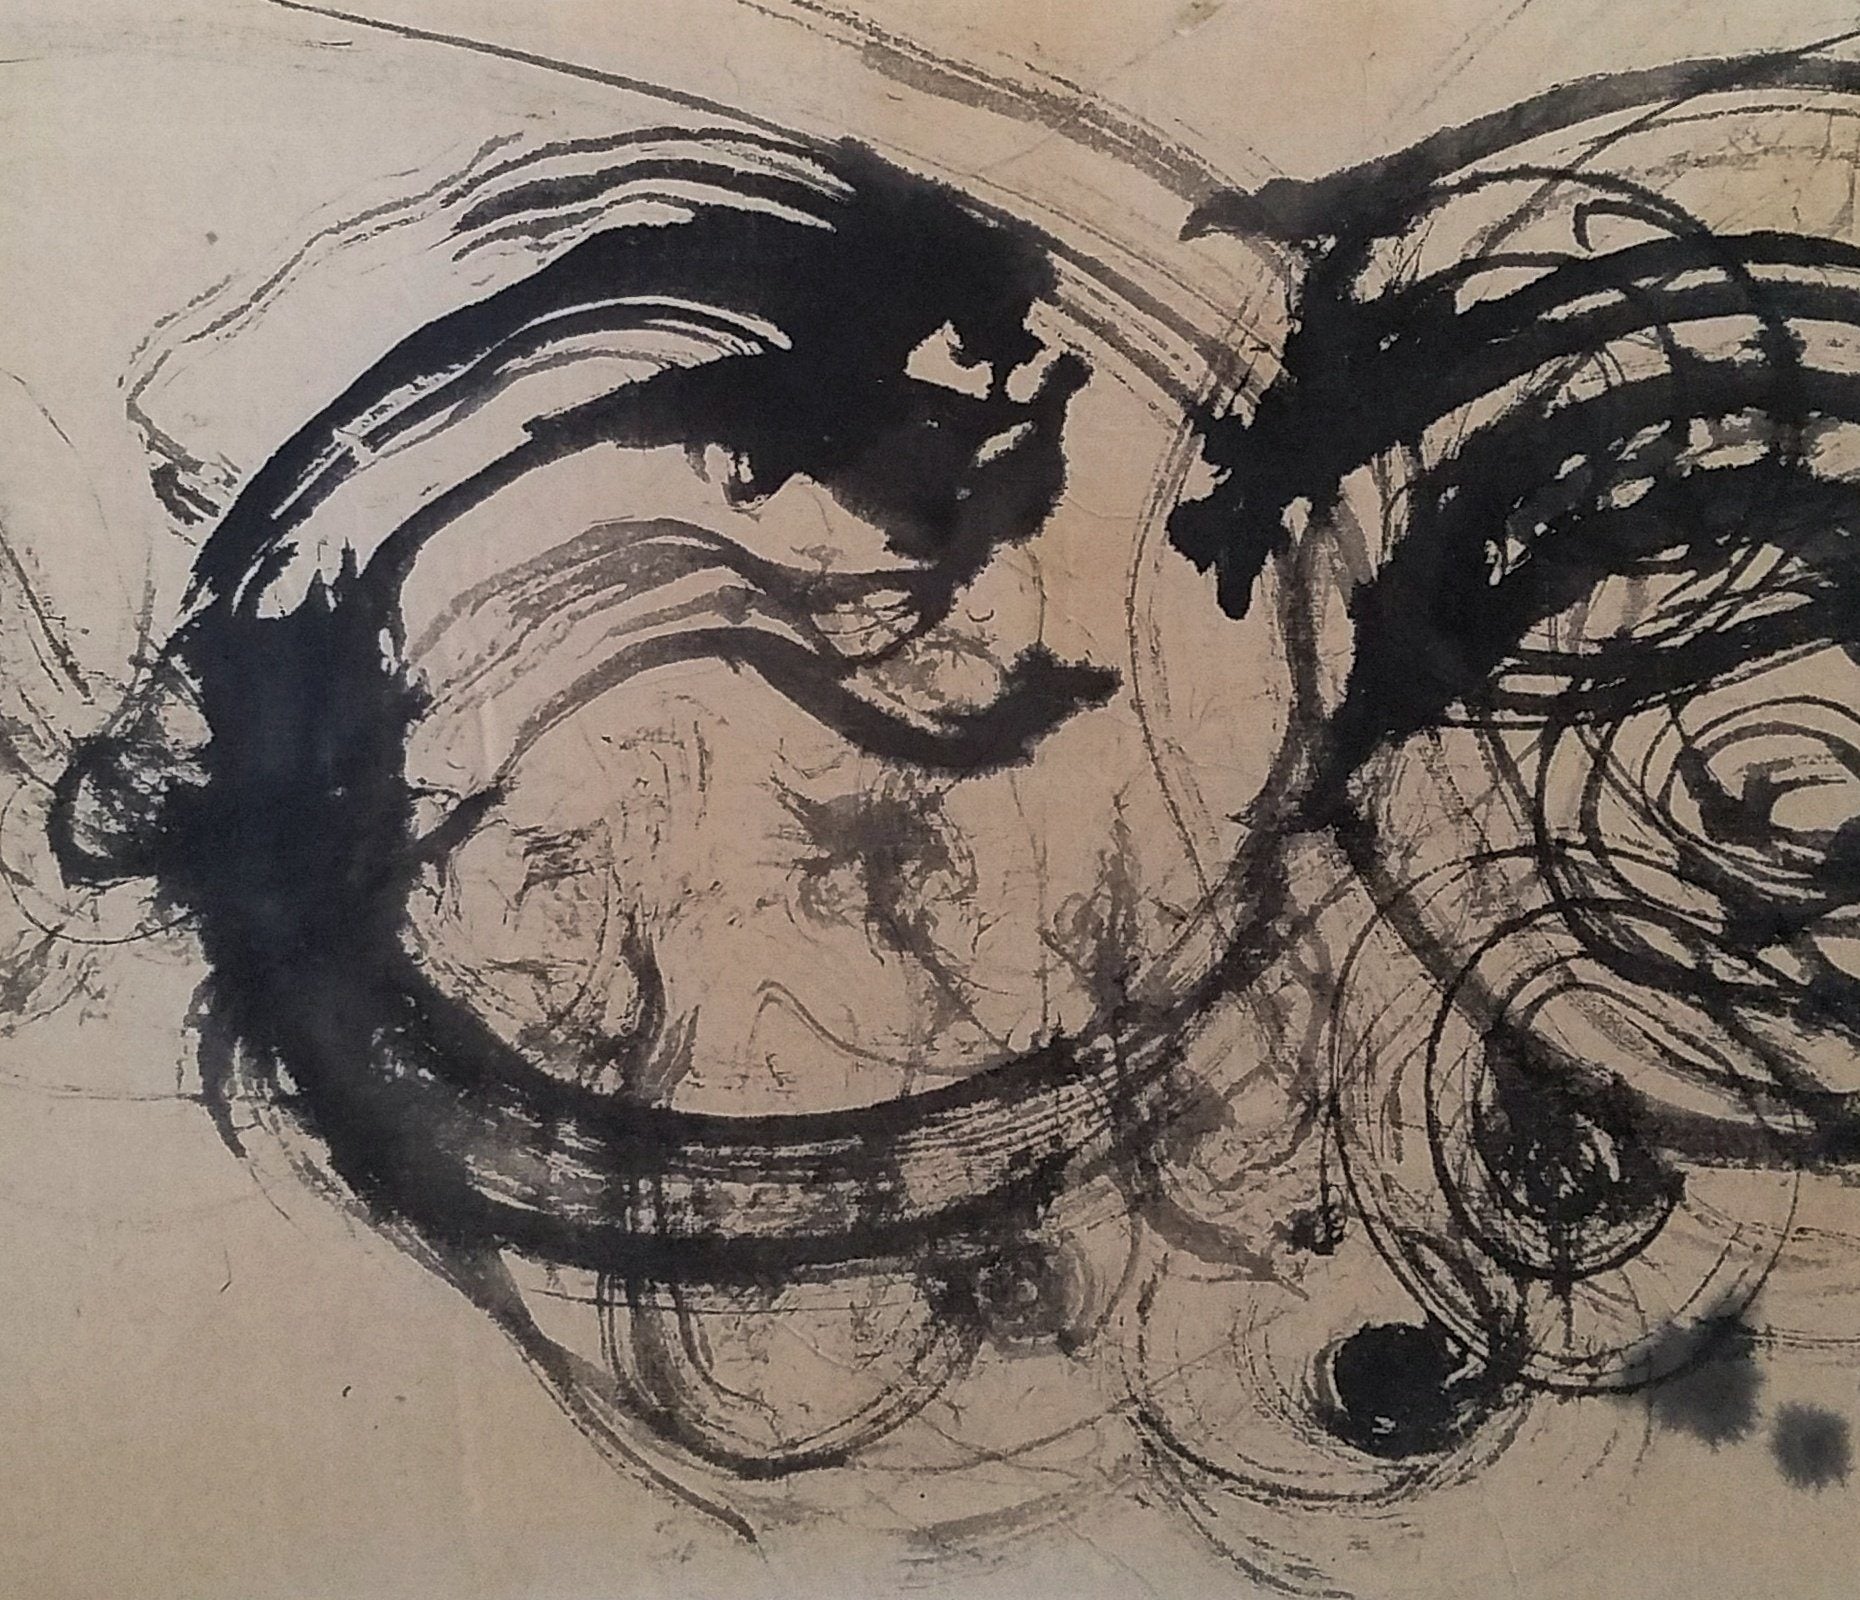 Dragon Dance 13X30X2 Ink on Paper Painting by Elizabeth Schowachert - Elizabeth Schowachert Art